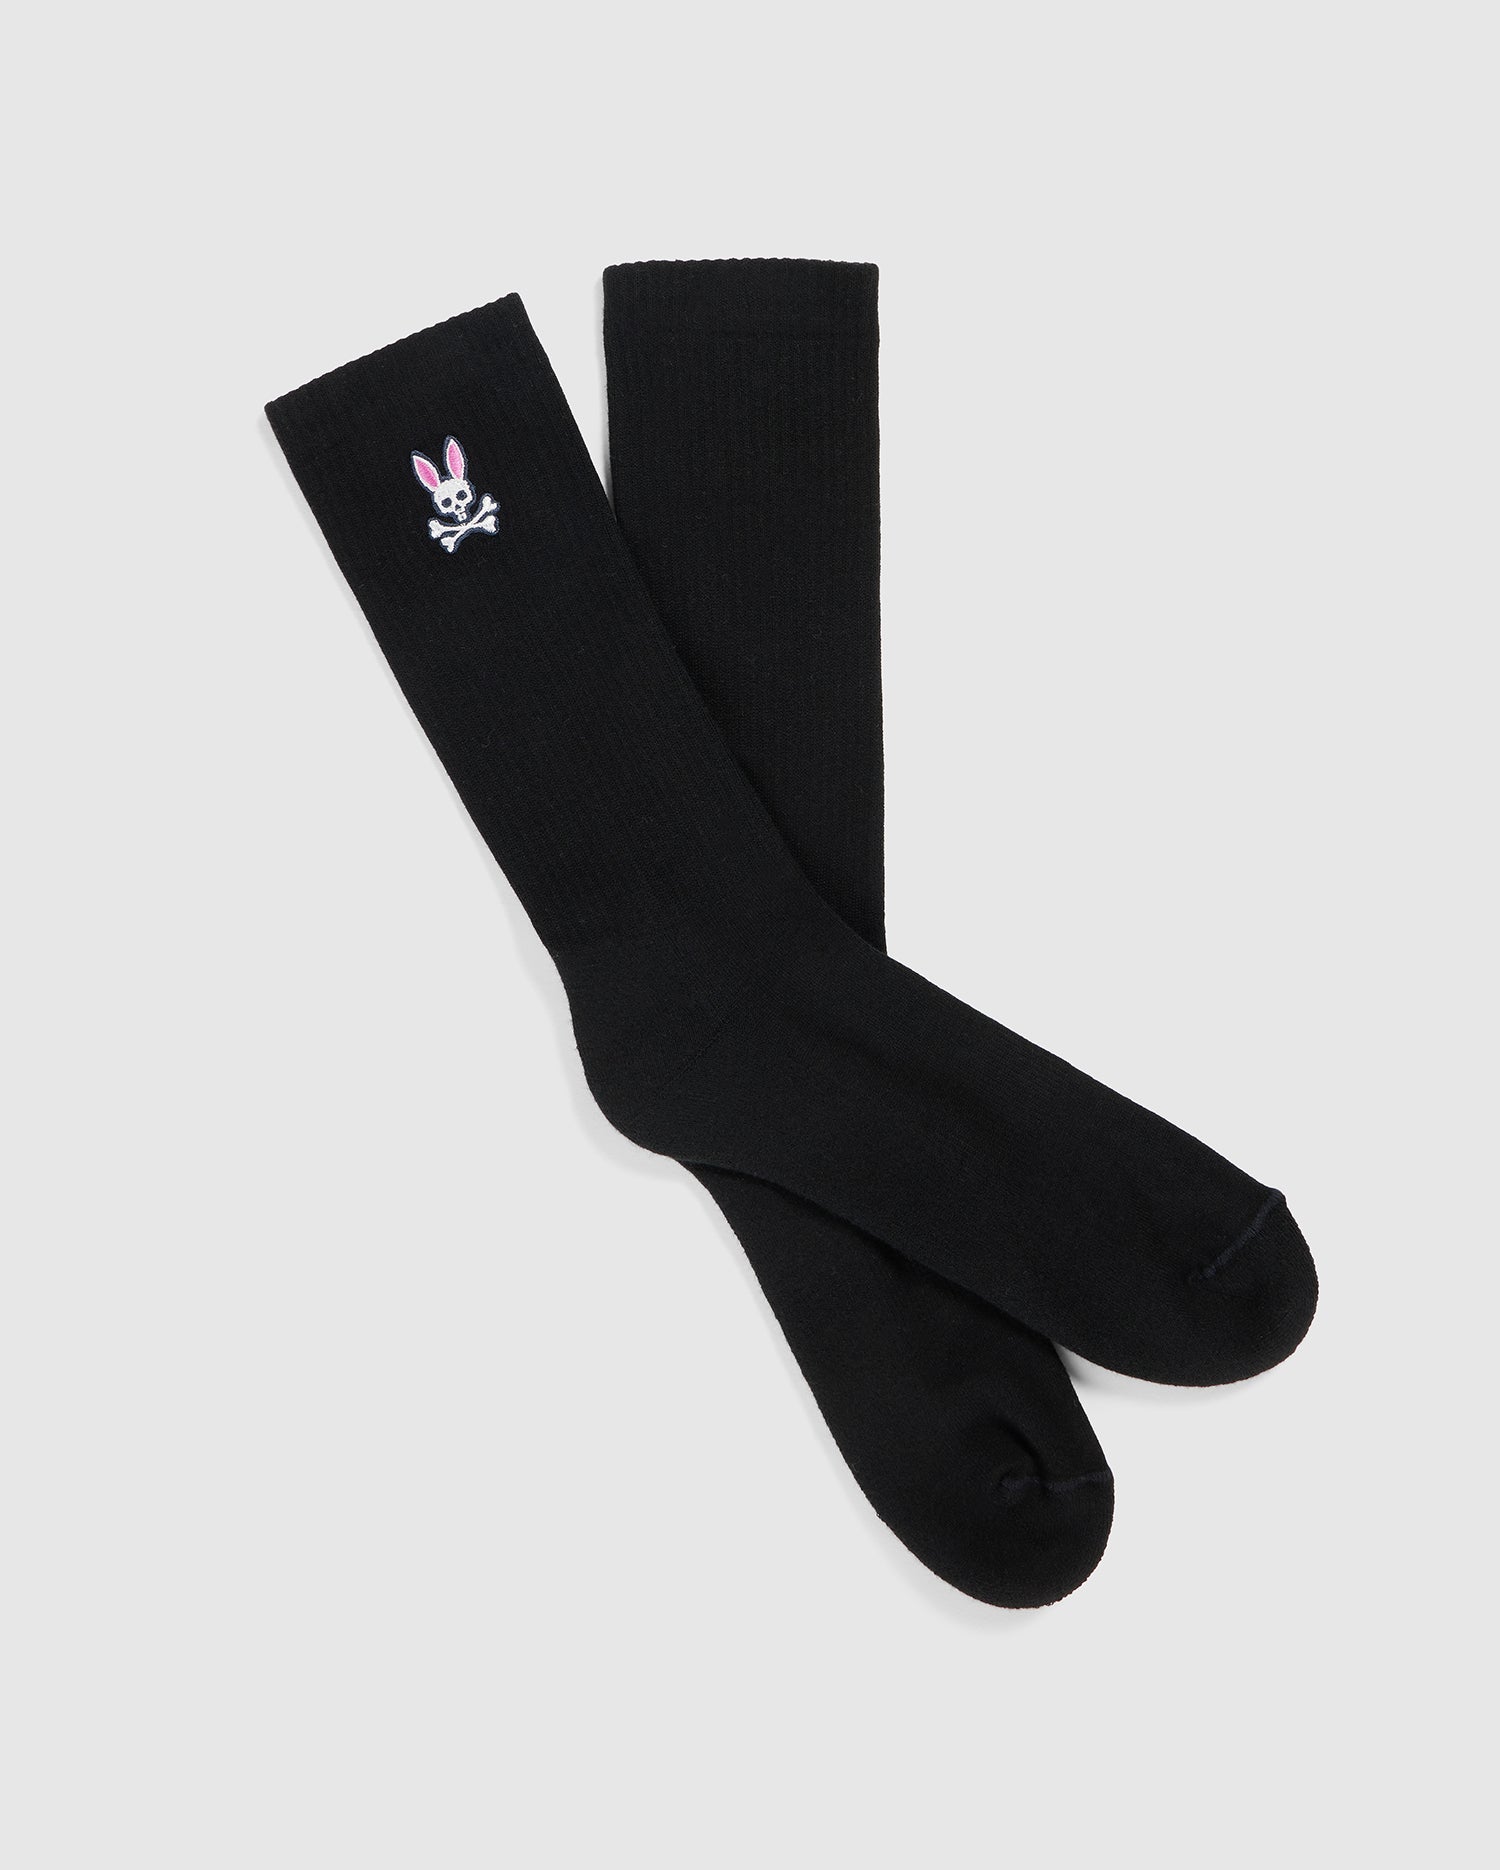 A pair of black knee-high fashion socks with a small embroidered design near the top on one sock. The design features a white skull and crossbones with pink ears resembling a bunny. Made in Peru from luxurious Pima cotton, the Psycho Bunny MENS FASHION SOCKS - B6F486C200 are displayed on a plain white background.